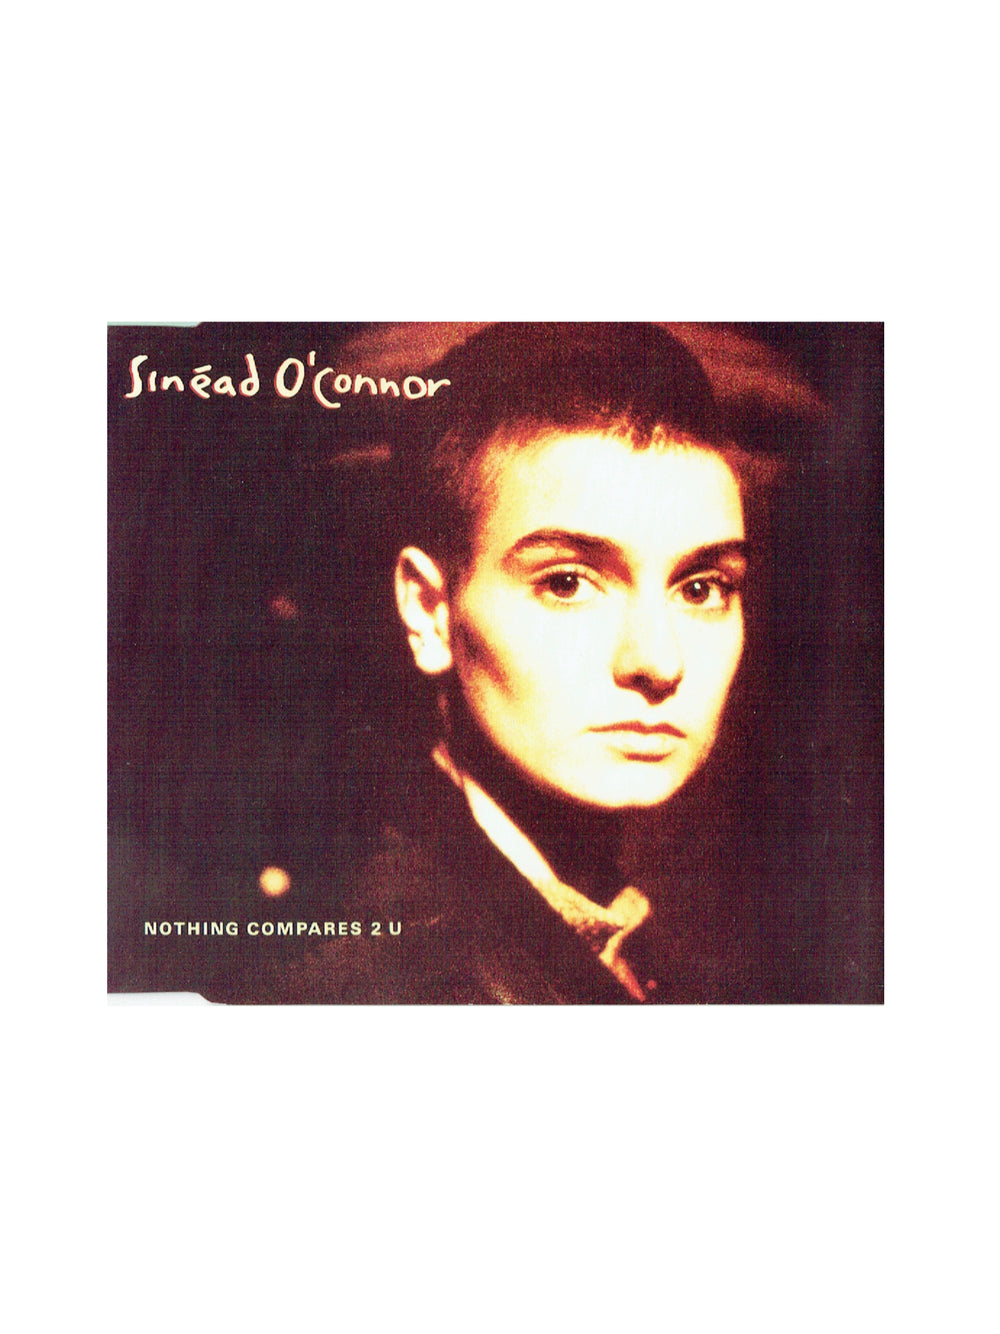 Prince – Sinead O'Conner Nothing Compares 2 U CD Single UK Preloved: 1990